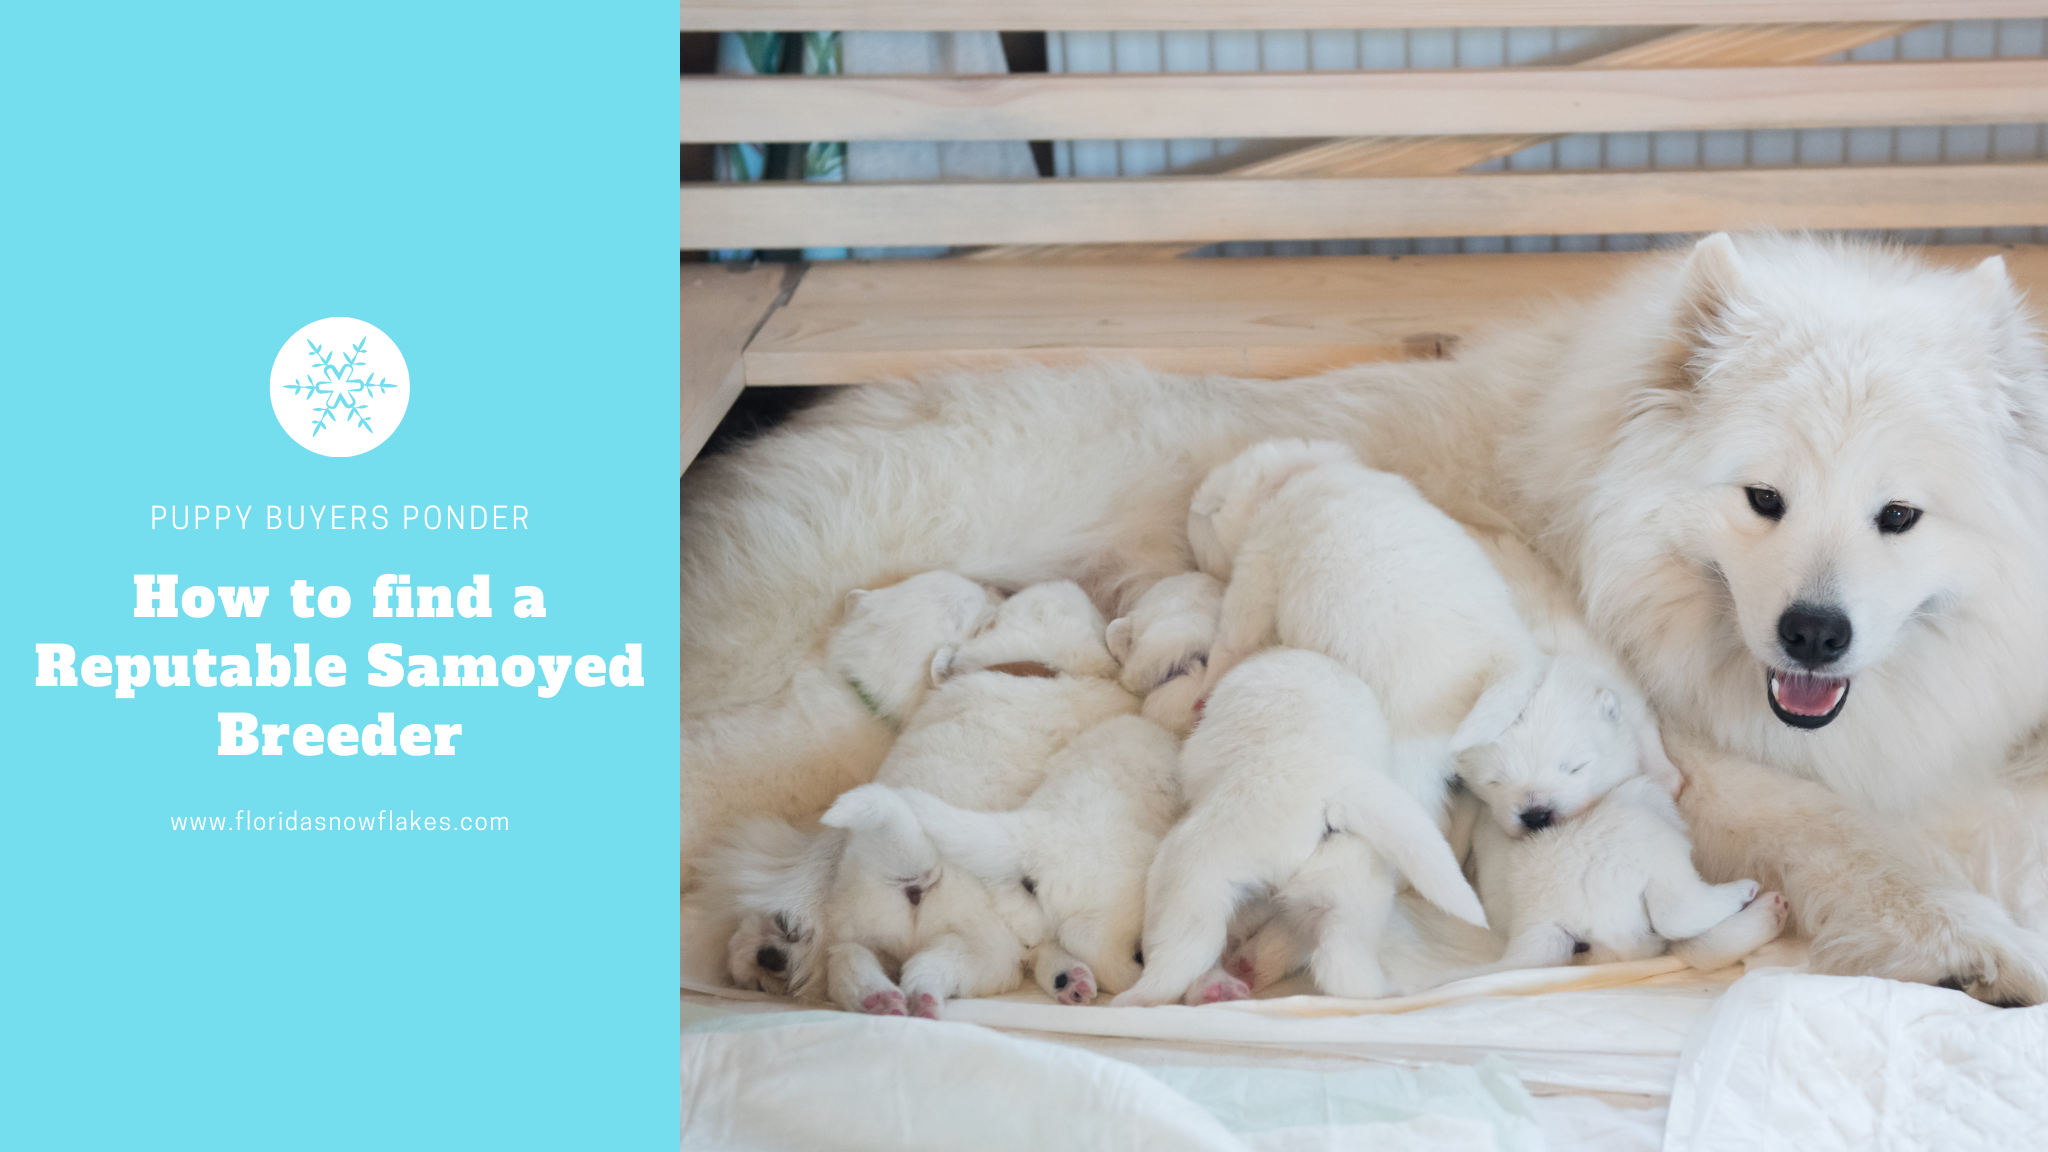 Puppy Buyers Ponder- How to find a Reputable Samoyed Breeder. w w w dot florida snowflakes dot com